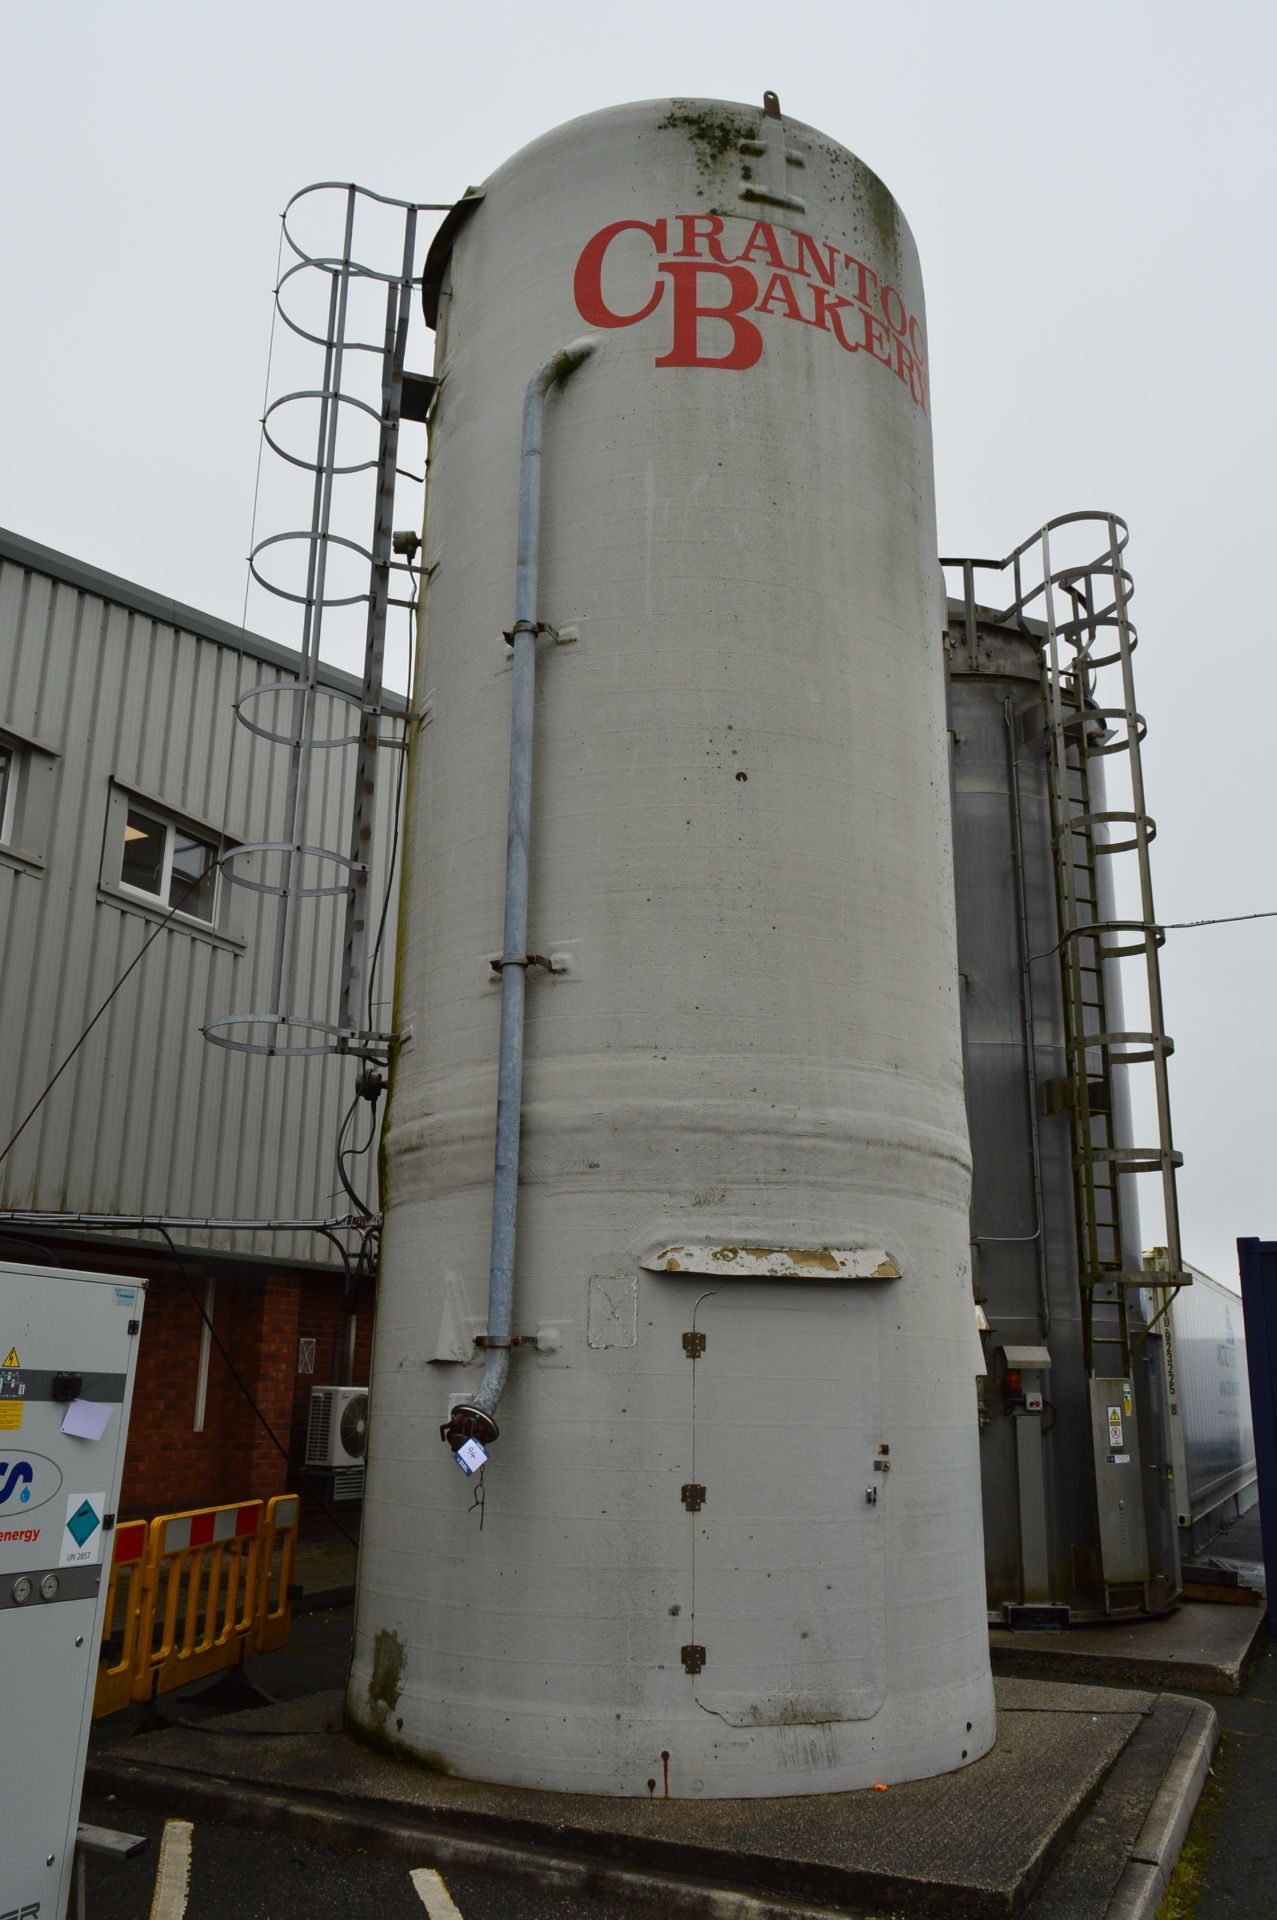 Make-unknown storage silo (Located at Crantock Bakery, Newquay) - Image 3 of 3